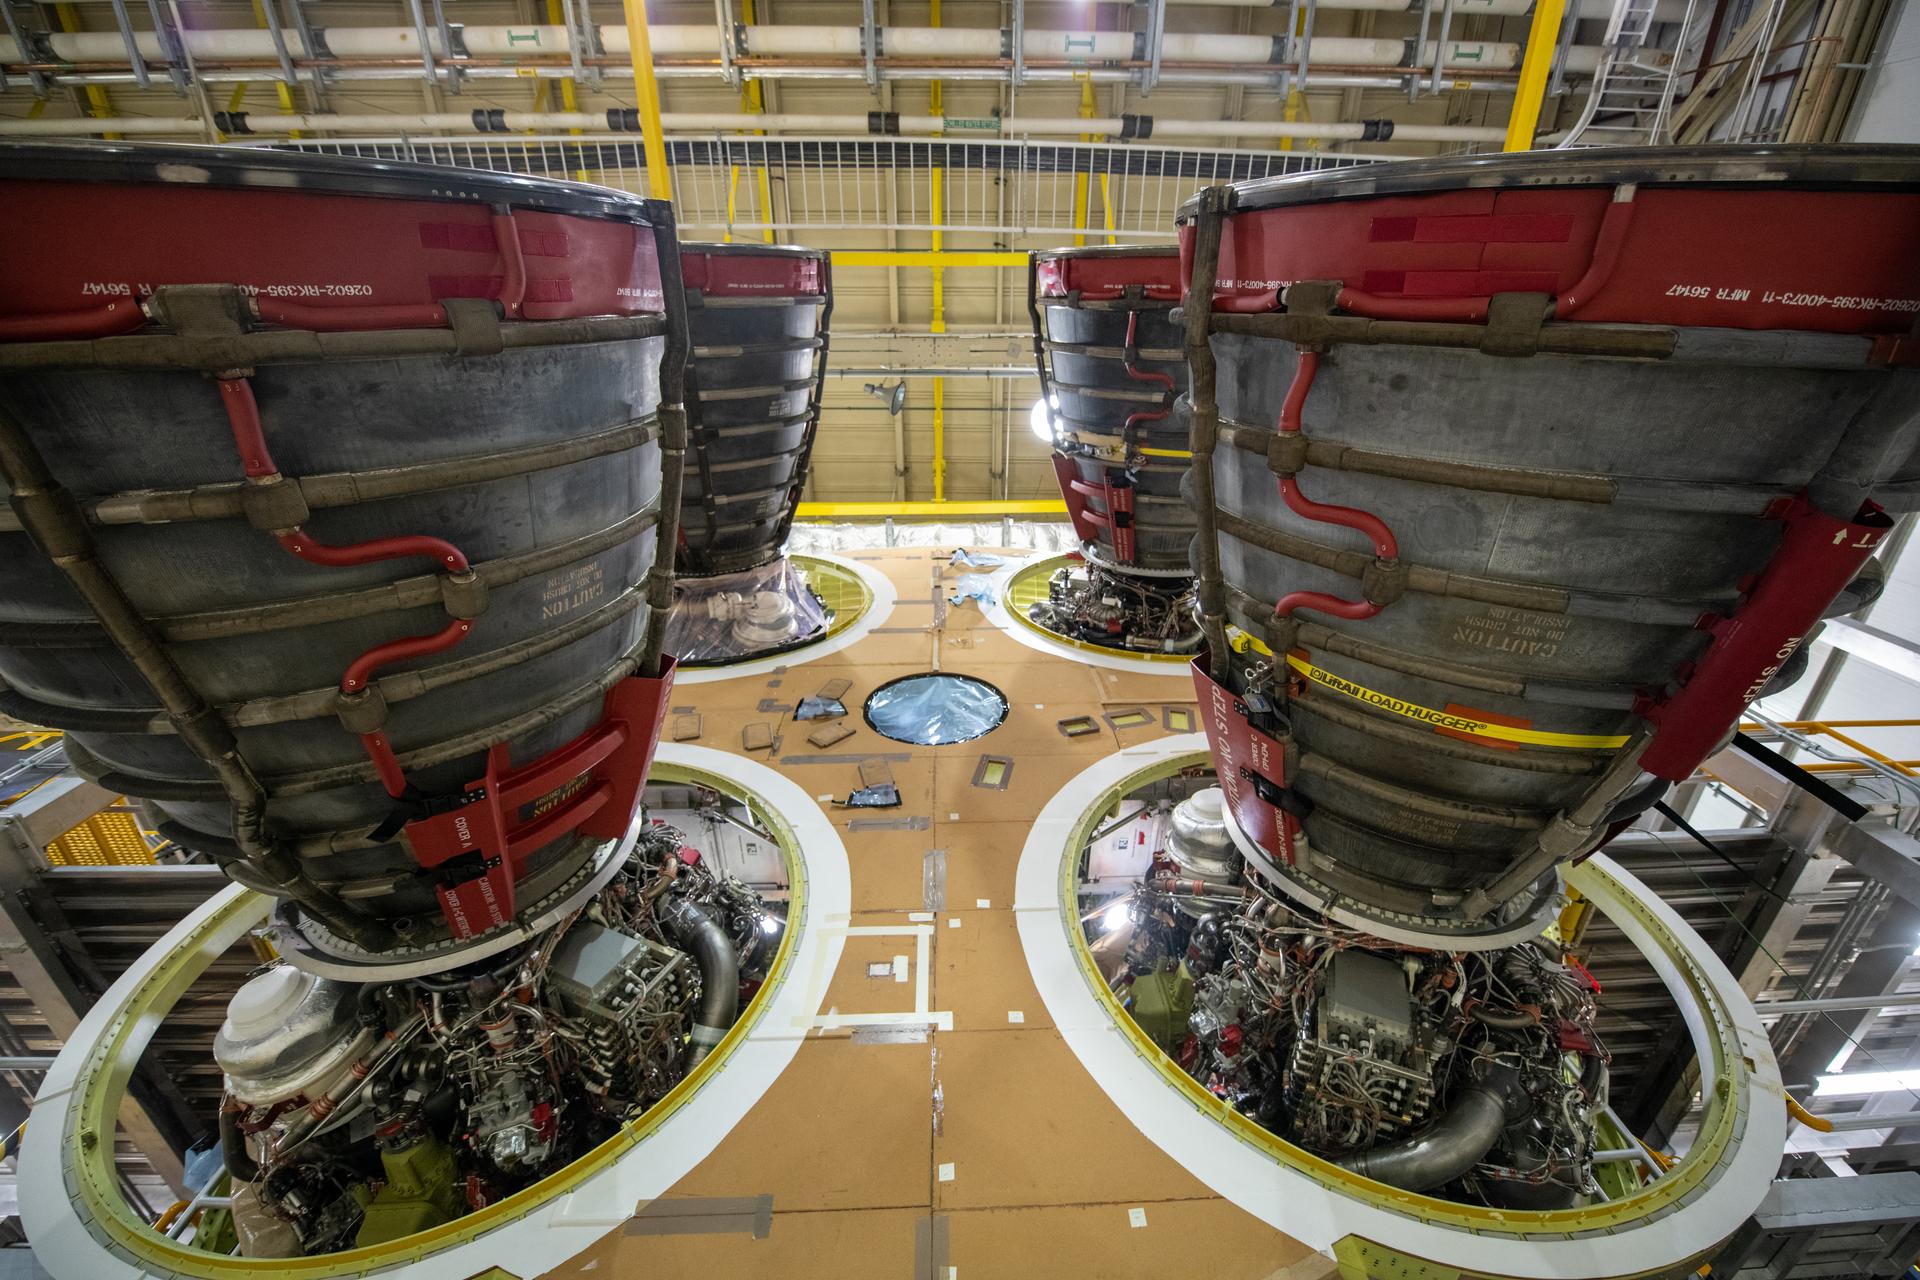 The four RS-25 engines, shown here, are attached to the SLS core stage that will send the Artemis I mission to the Moon.